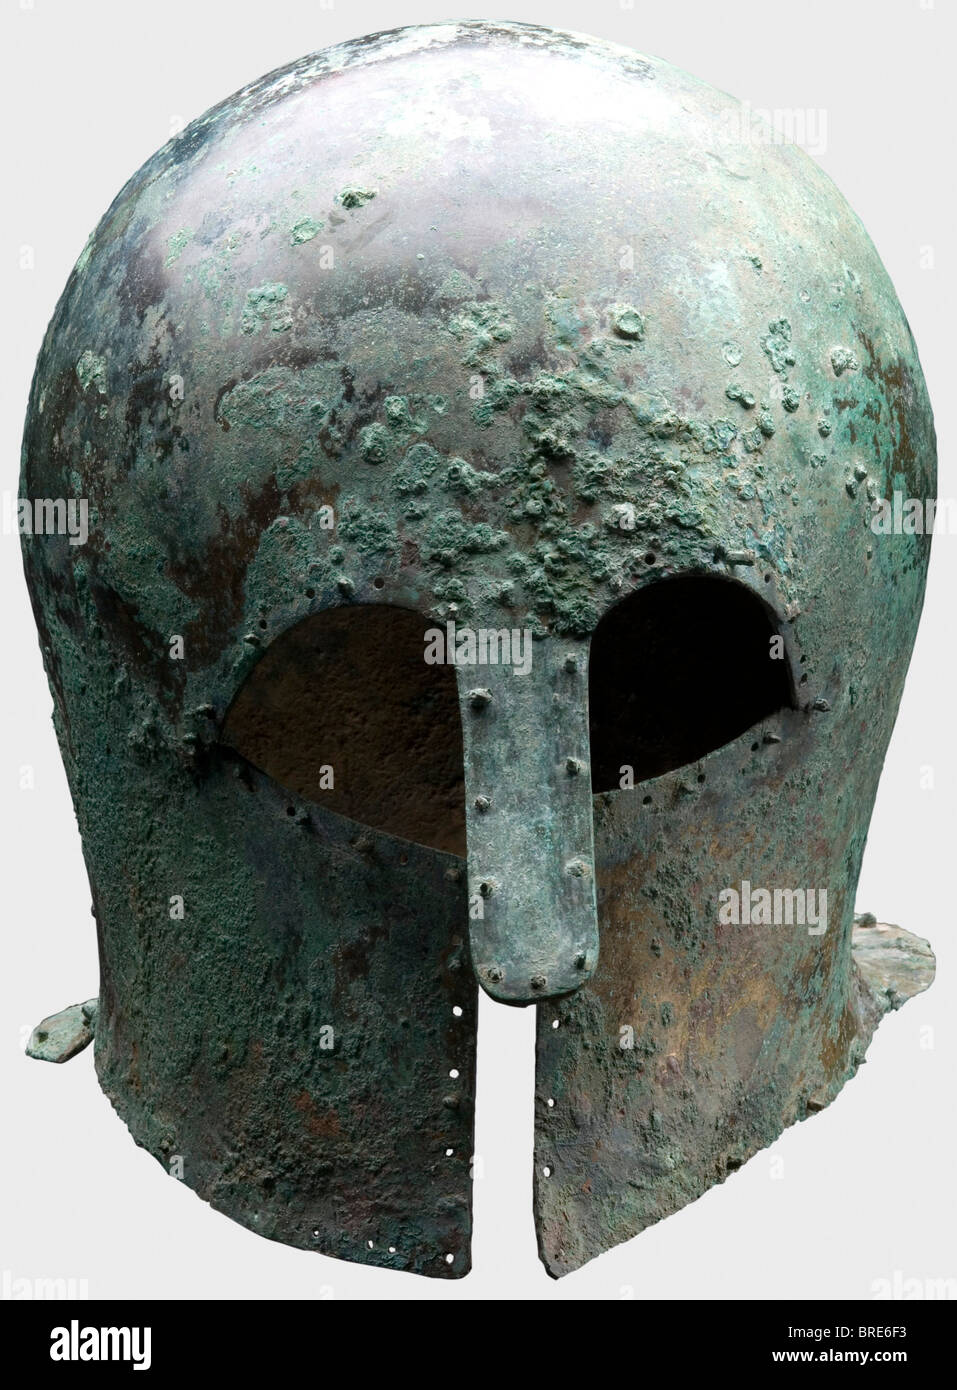 A Corinthian helmet, 7th/6th century B.C. Thick-walled, heavy, bronze Corinthian helmet with a tall skull and extended neck-guard. Large eye cutouts, slightly concave cheekpieces and a sturdy riveted long nose-guard bent outwards. Surrounded with drilled holes, some in pairs, and some still retaining the decorative or lining rivets with round heads. Height 22.1 cm. Weight 1288 g. Metal surfaces with light-brown, dark and light-green patina. Dirt residue inside. Isolated corrosion pits on the surface. Very good metal retention. Axel Guttmann Collection (H 147/ A, Stock Photo